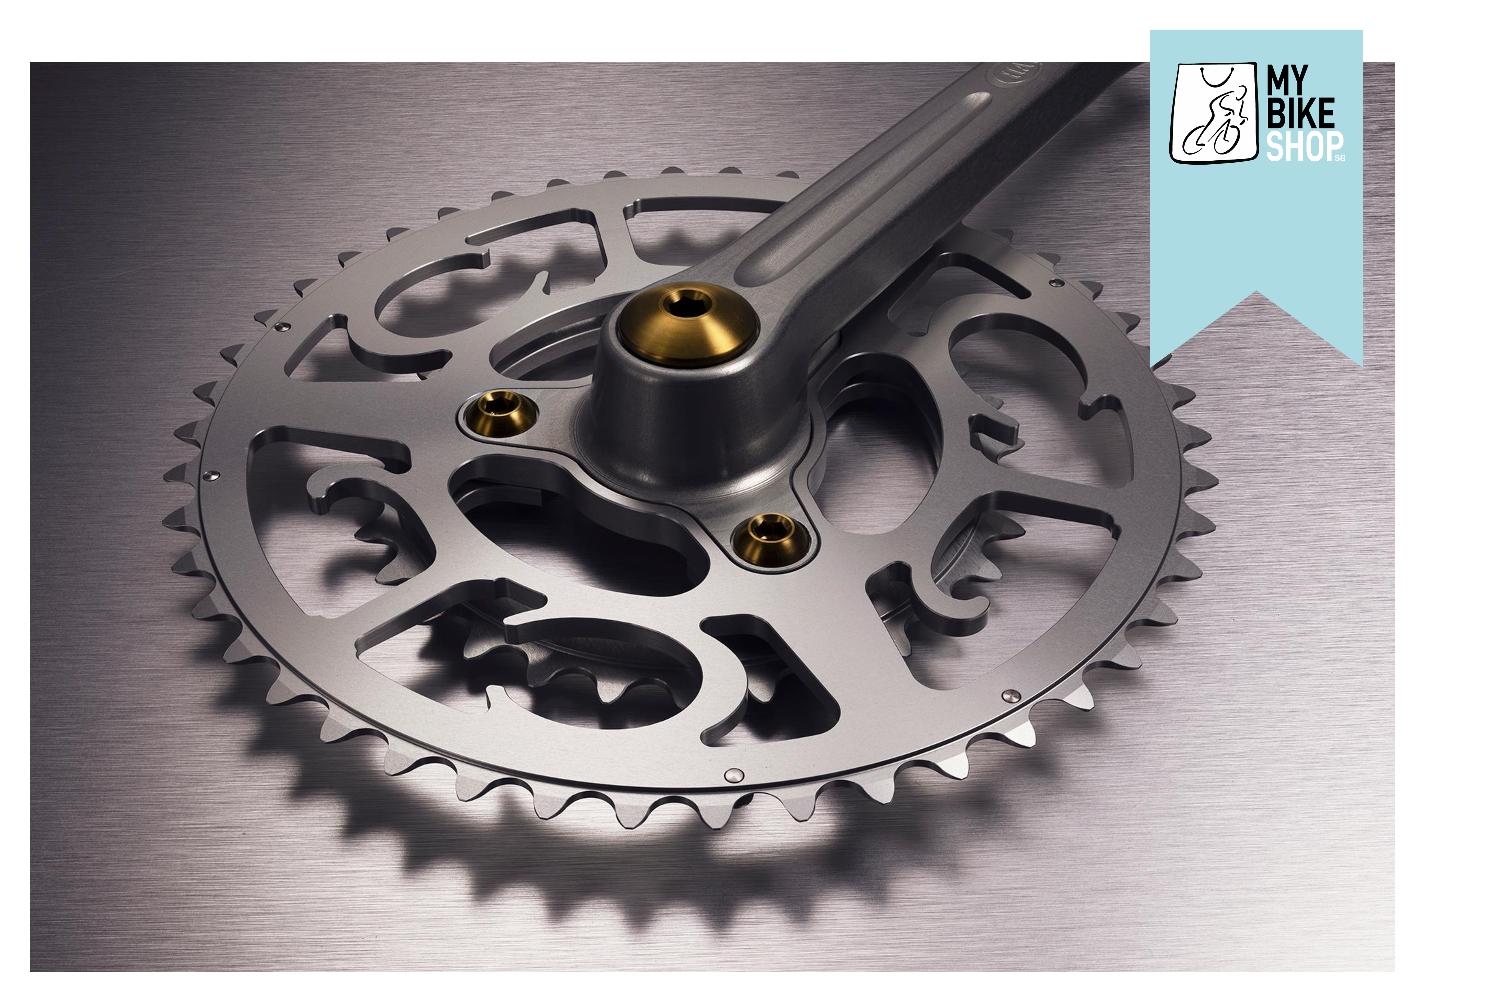 Chater Lea exquisite chainrings is now in Singapore